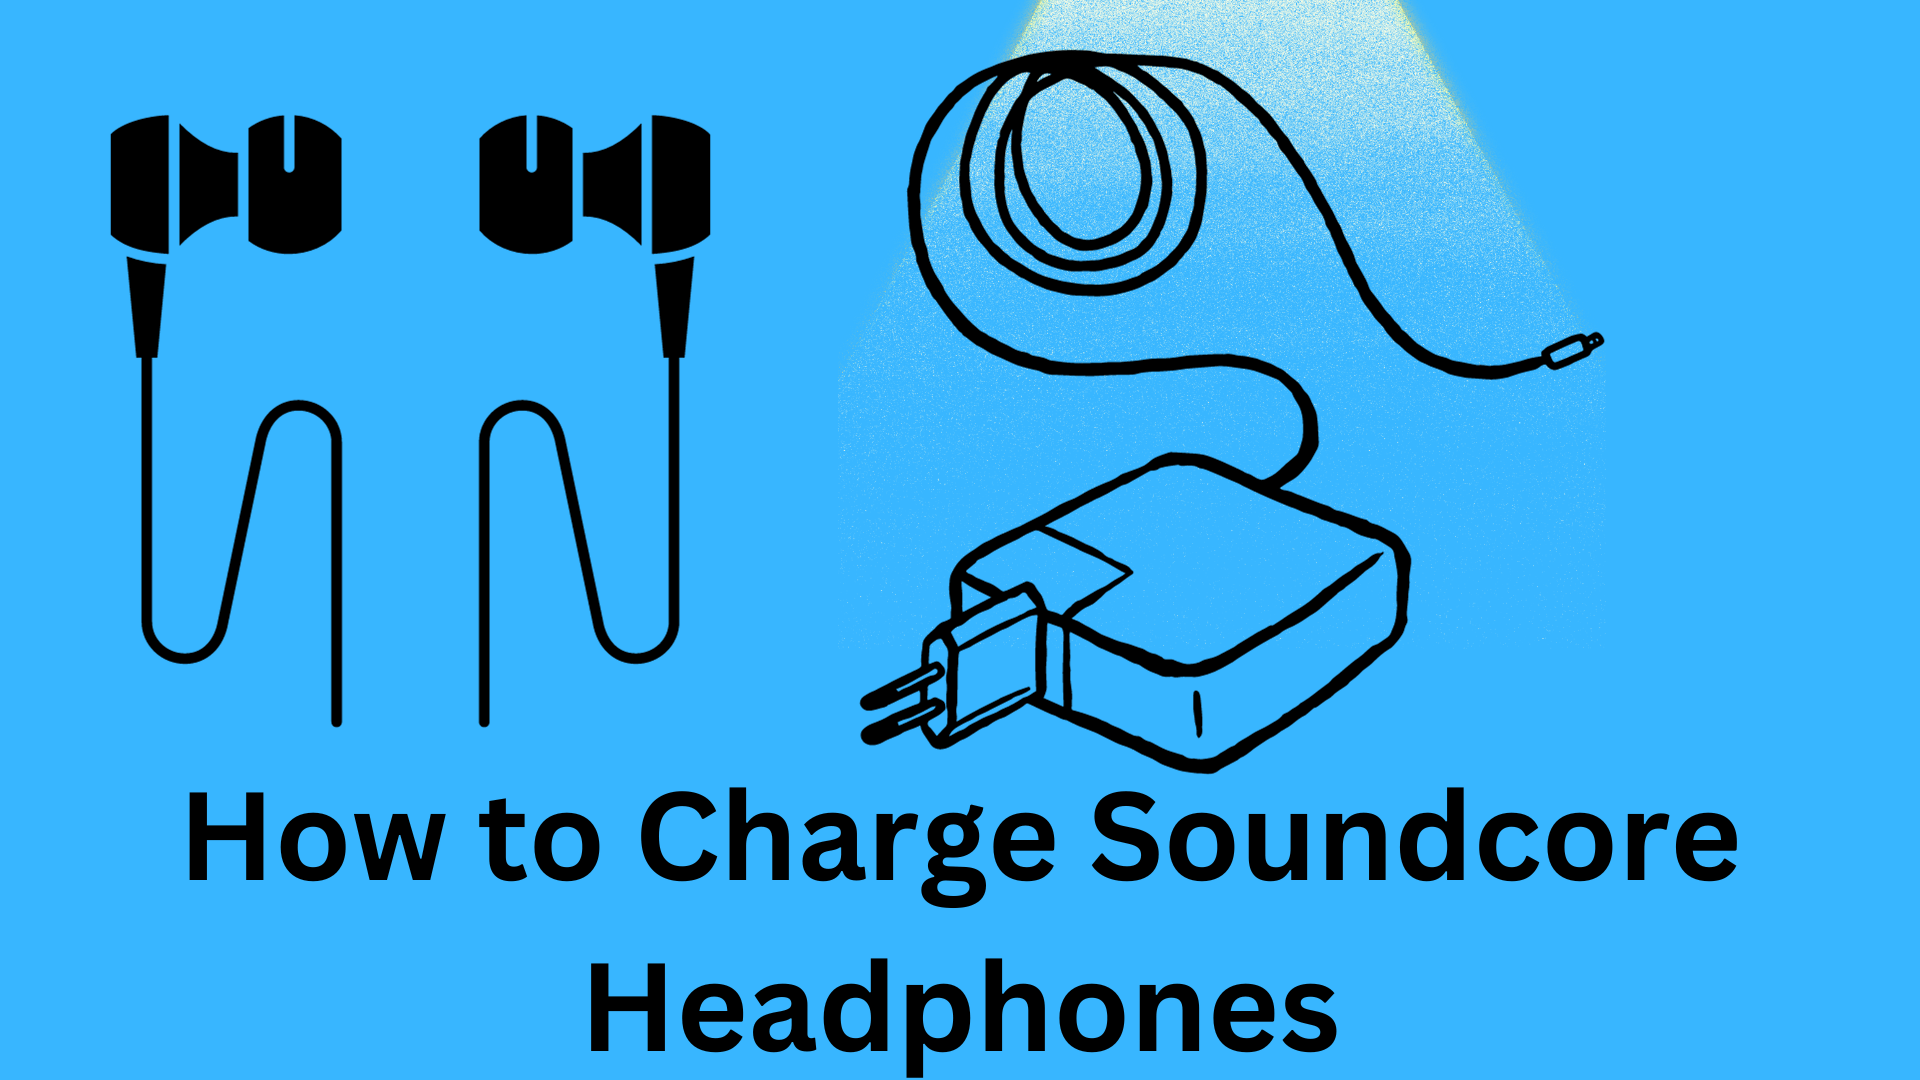 If you're wondering how to charge Soundcore headphones effectively, you've come to the right place